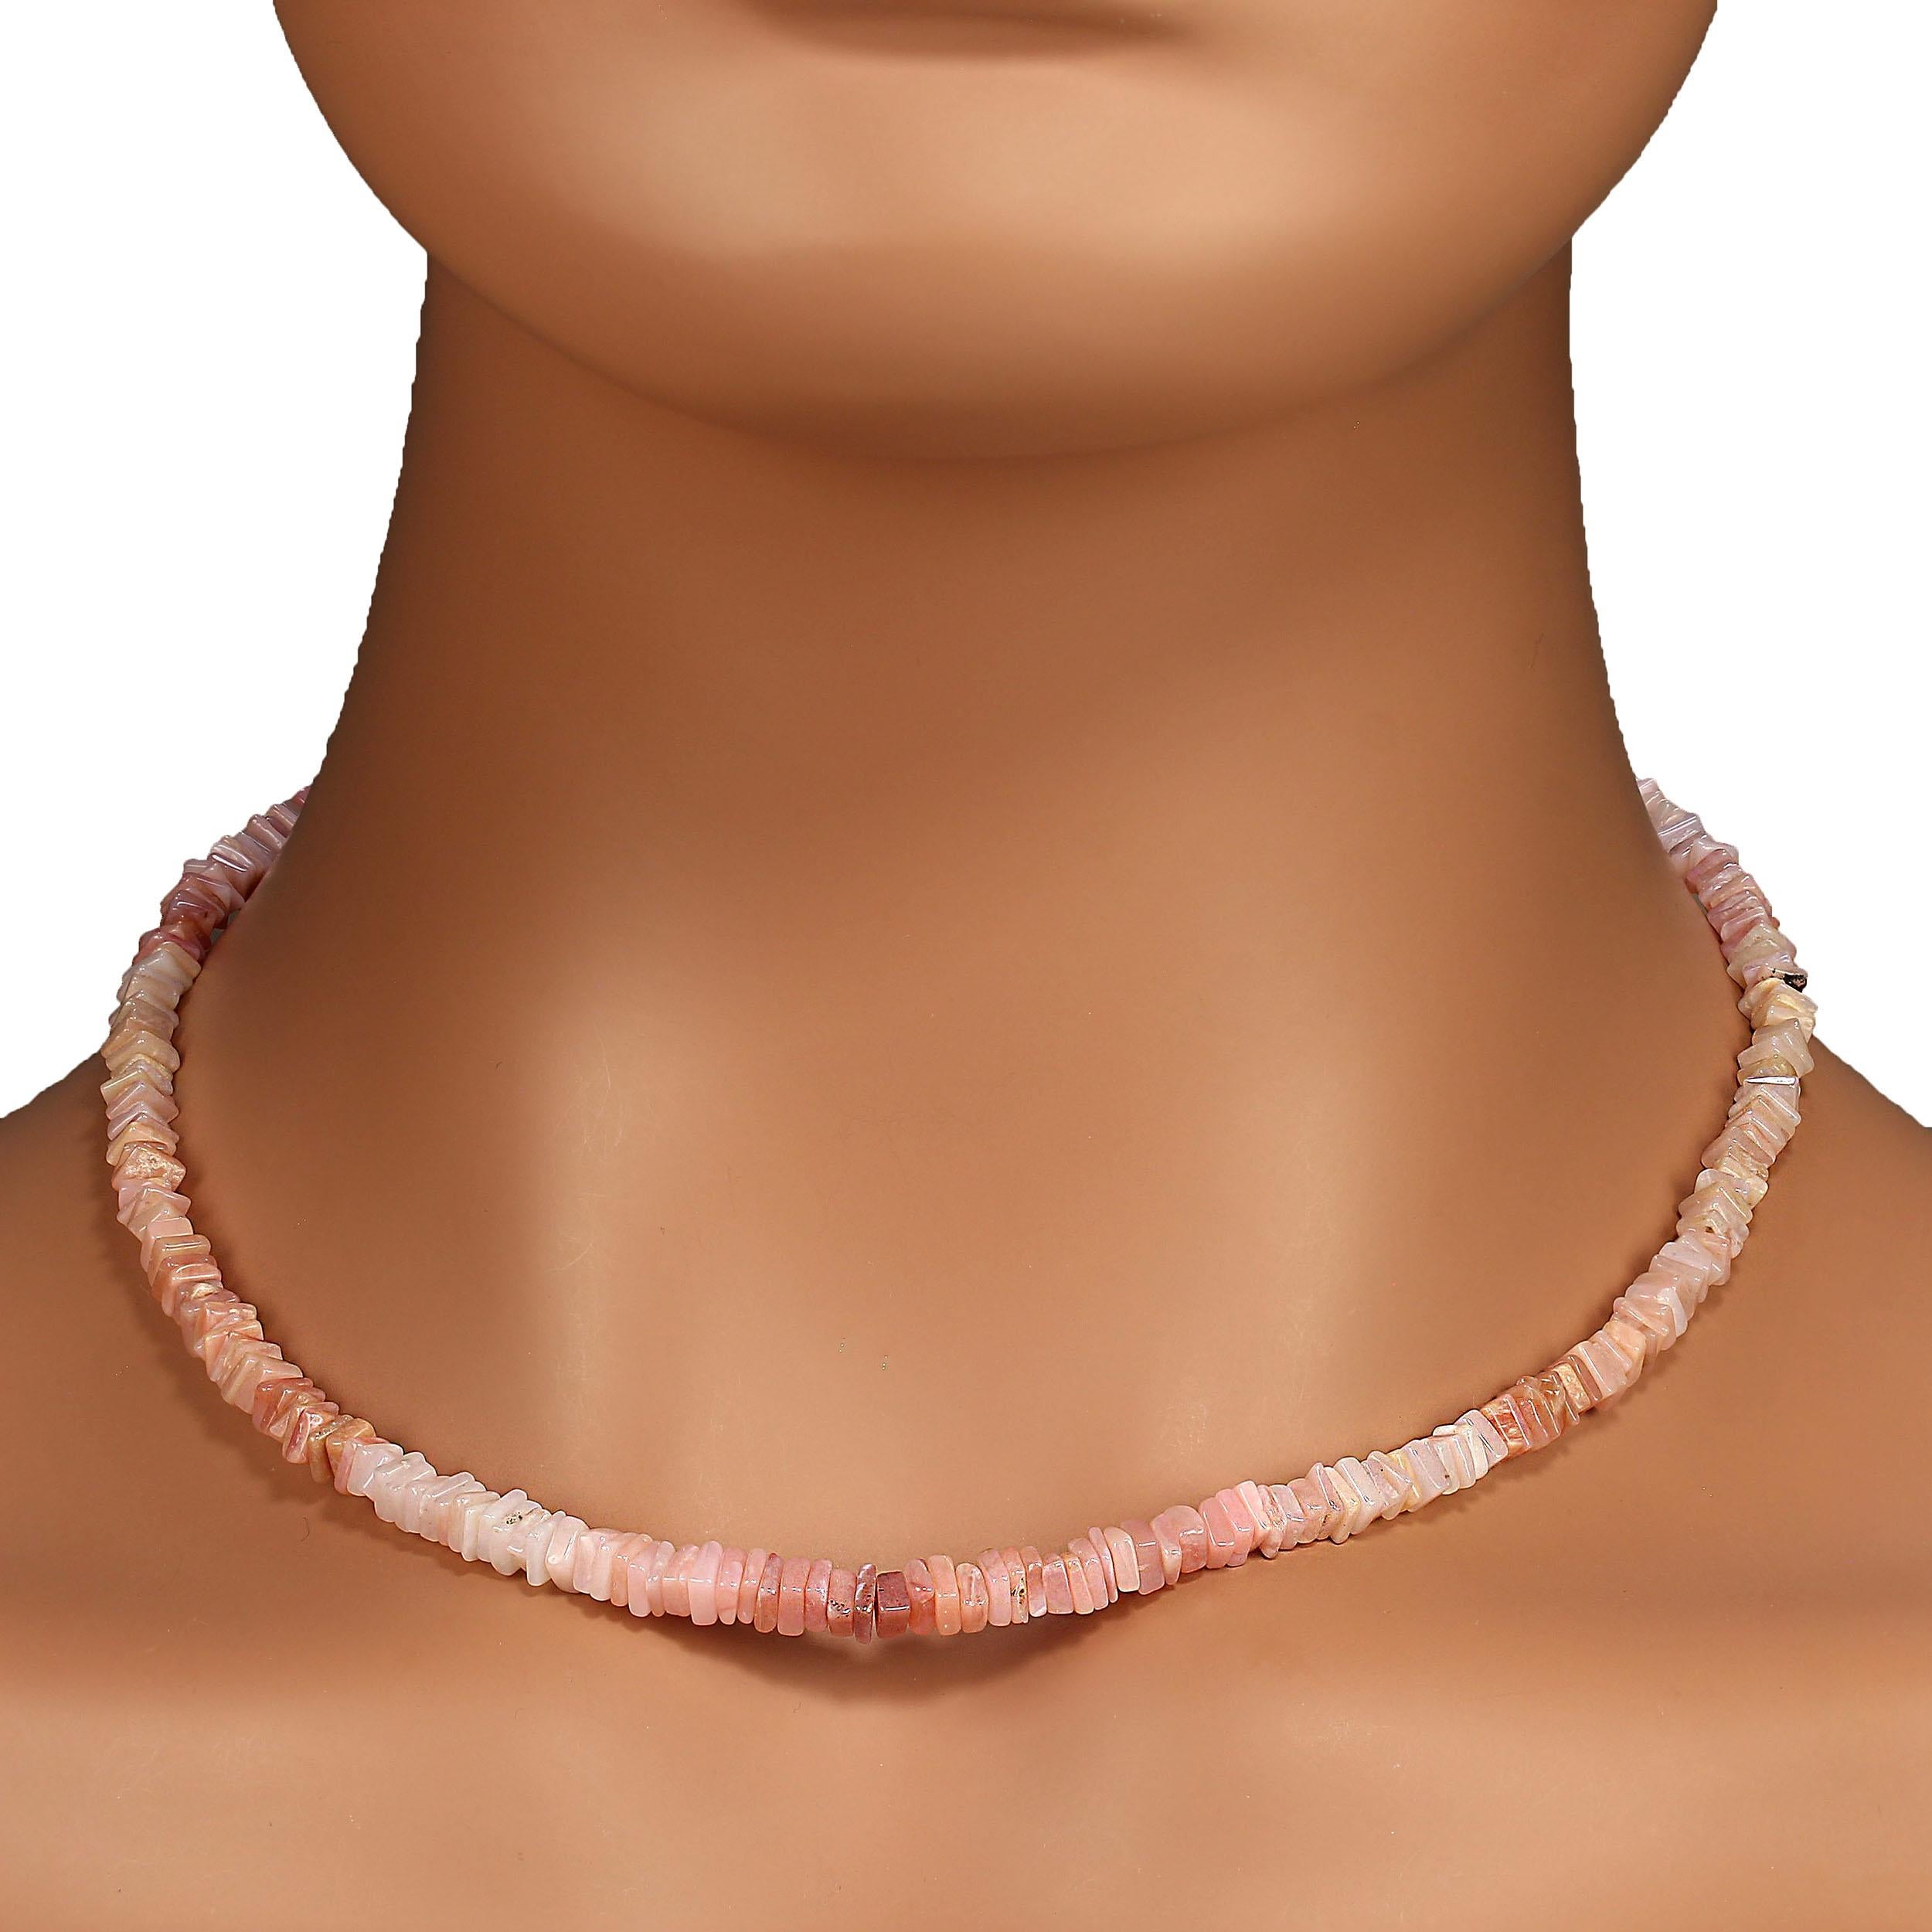 17 Inch Pink Peruvian Opal necklace.  This lovely pink necklace features various shades of pink peruvian opal  in 4mm squares. The delicate shades of pink are perfect for all skin tones.  MN 23102